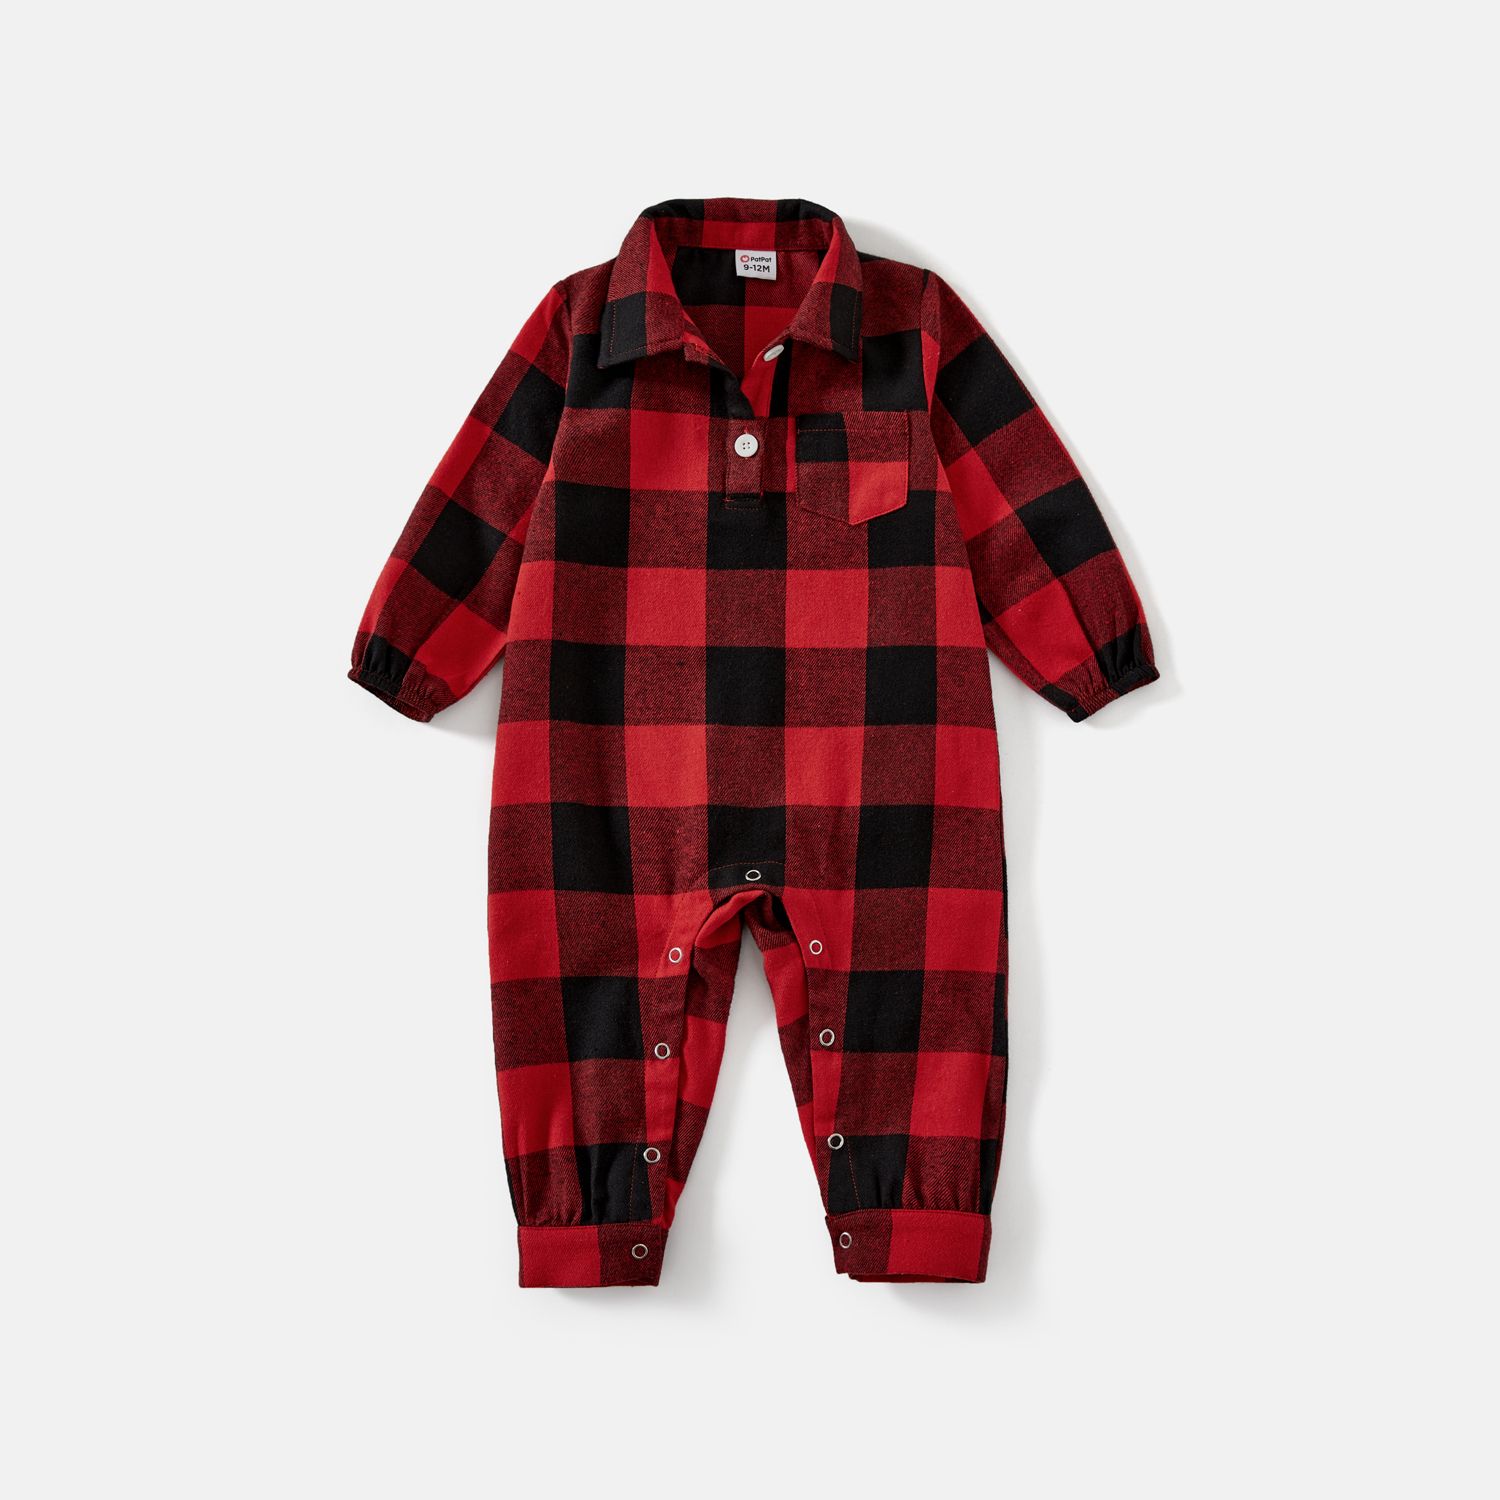 Family Matching Red and Black Plaid Long-sleeve  Shirts and Belted Dresses Sets